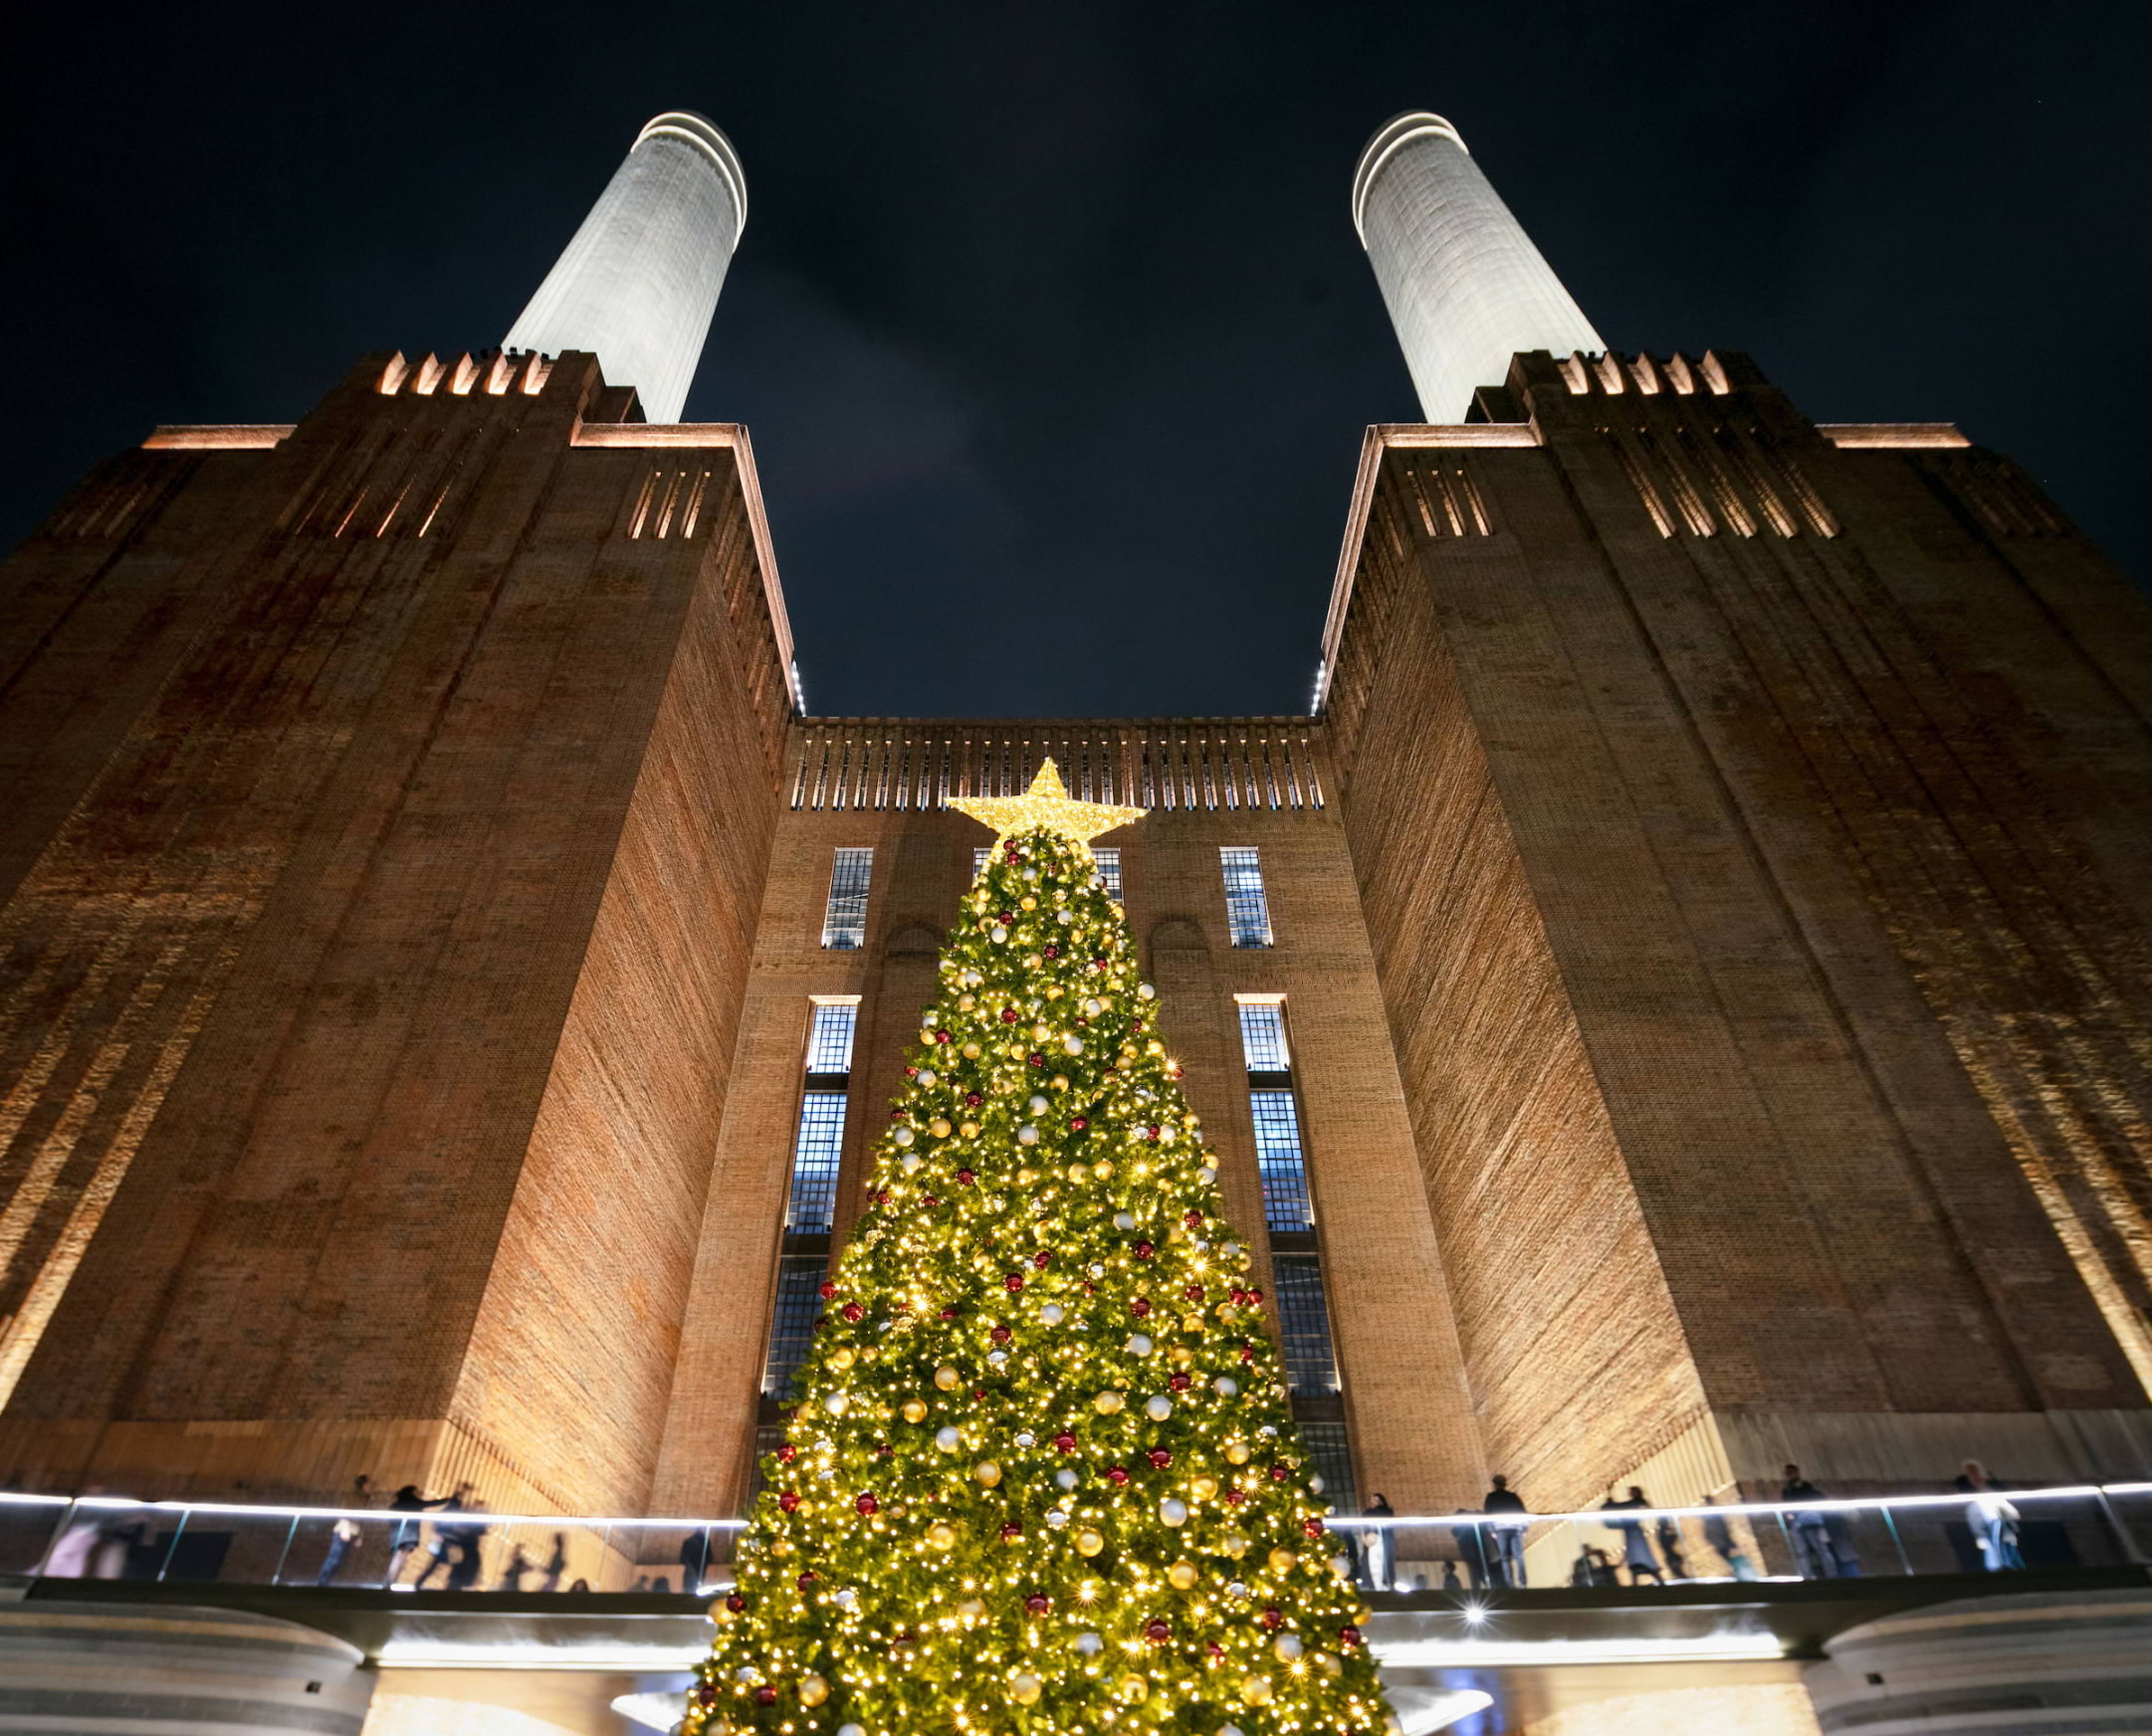 It's beginning to look a lot like Christmas at Battersea Power Station